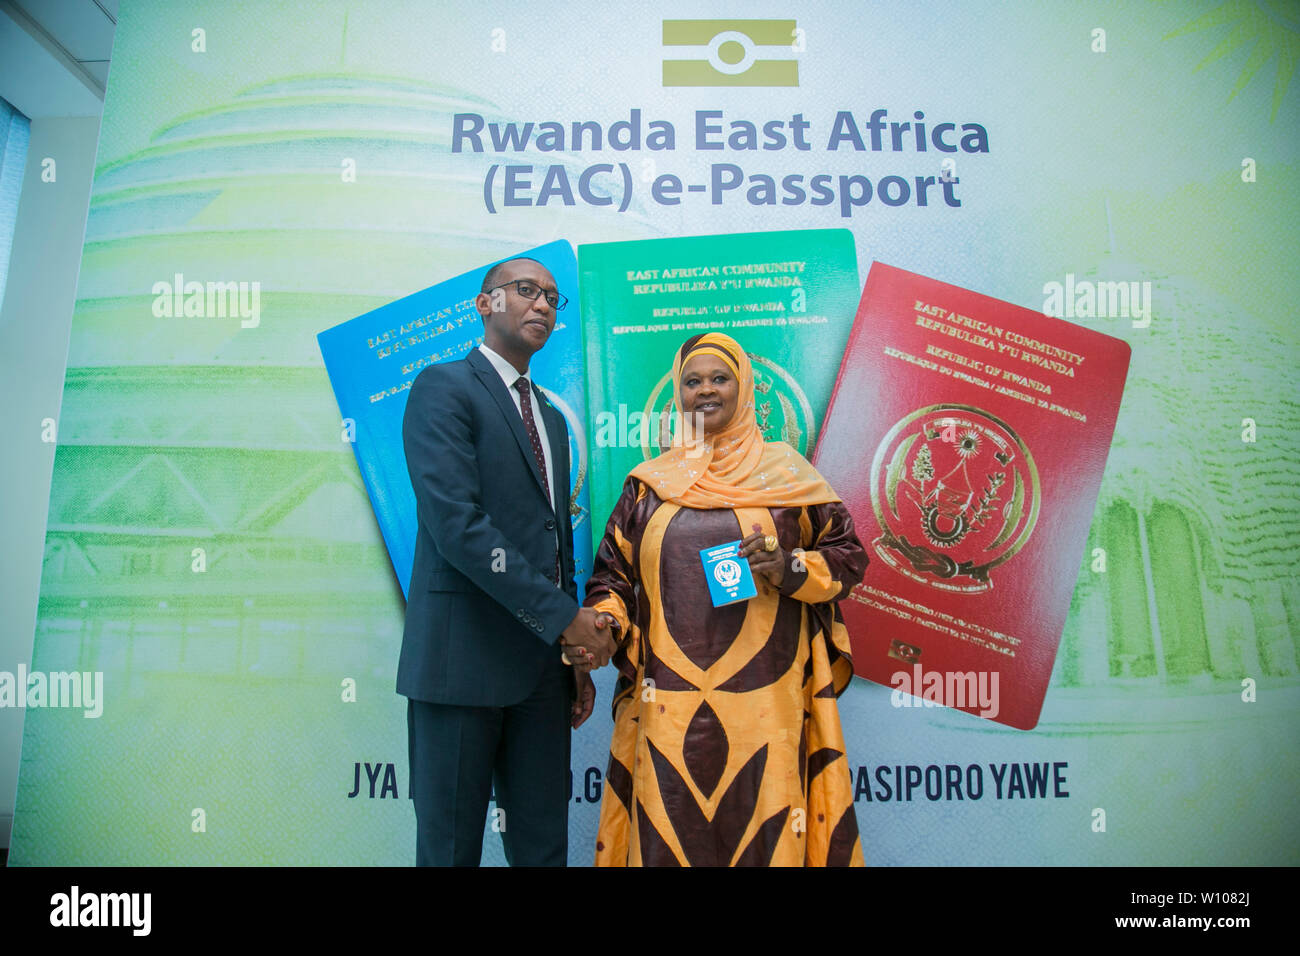 Kigali, Rwanda. 28th June, 2019. Francois Regis Gatarayiha (L), director general of Directorate General of Immigration and Emigration of Rwanda, presents a Rwanda East Africa e-passport to one of the first users in Kigali, capital city of Rwanda, on June 28, 2019. Rwanda has begun issuing the East Africa e-passport in line with the country's commitment to promote regional integration as envisioned by East African Community (EAC) partner states, an immigration official announced Friday. Credit: Cyril Ndegeya/Xinhua/Alamy Live News Stock Photo